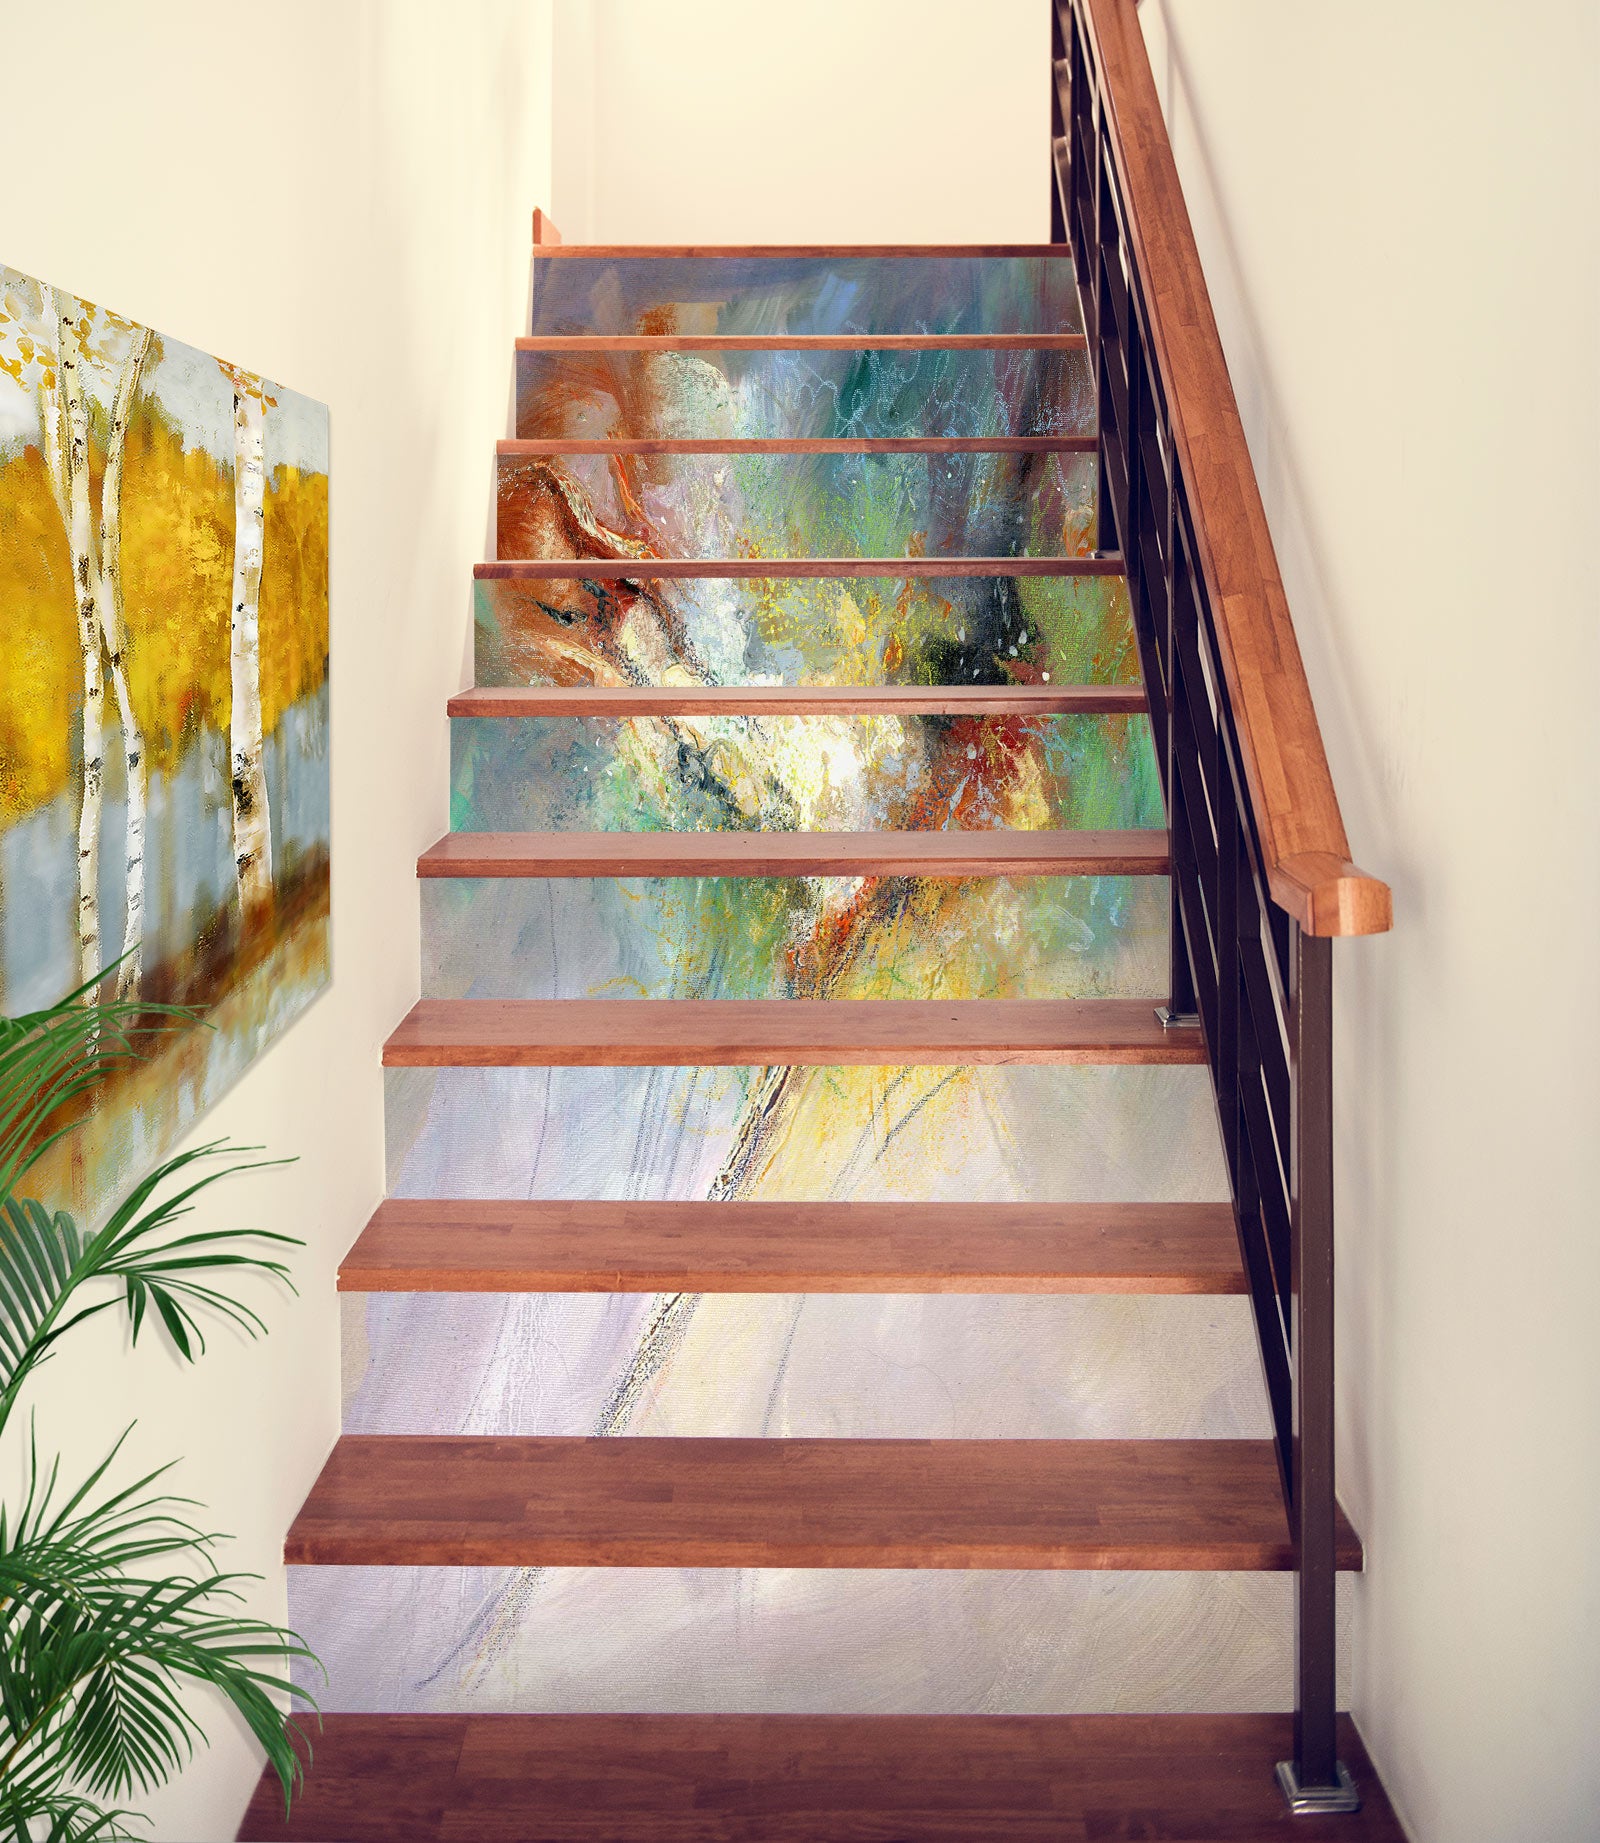 3D Colorful Texture 9807 Anne Farrall Doyle Stair Risers